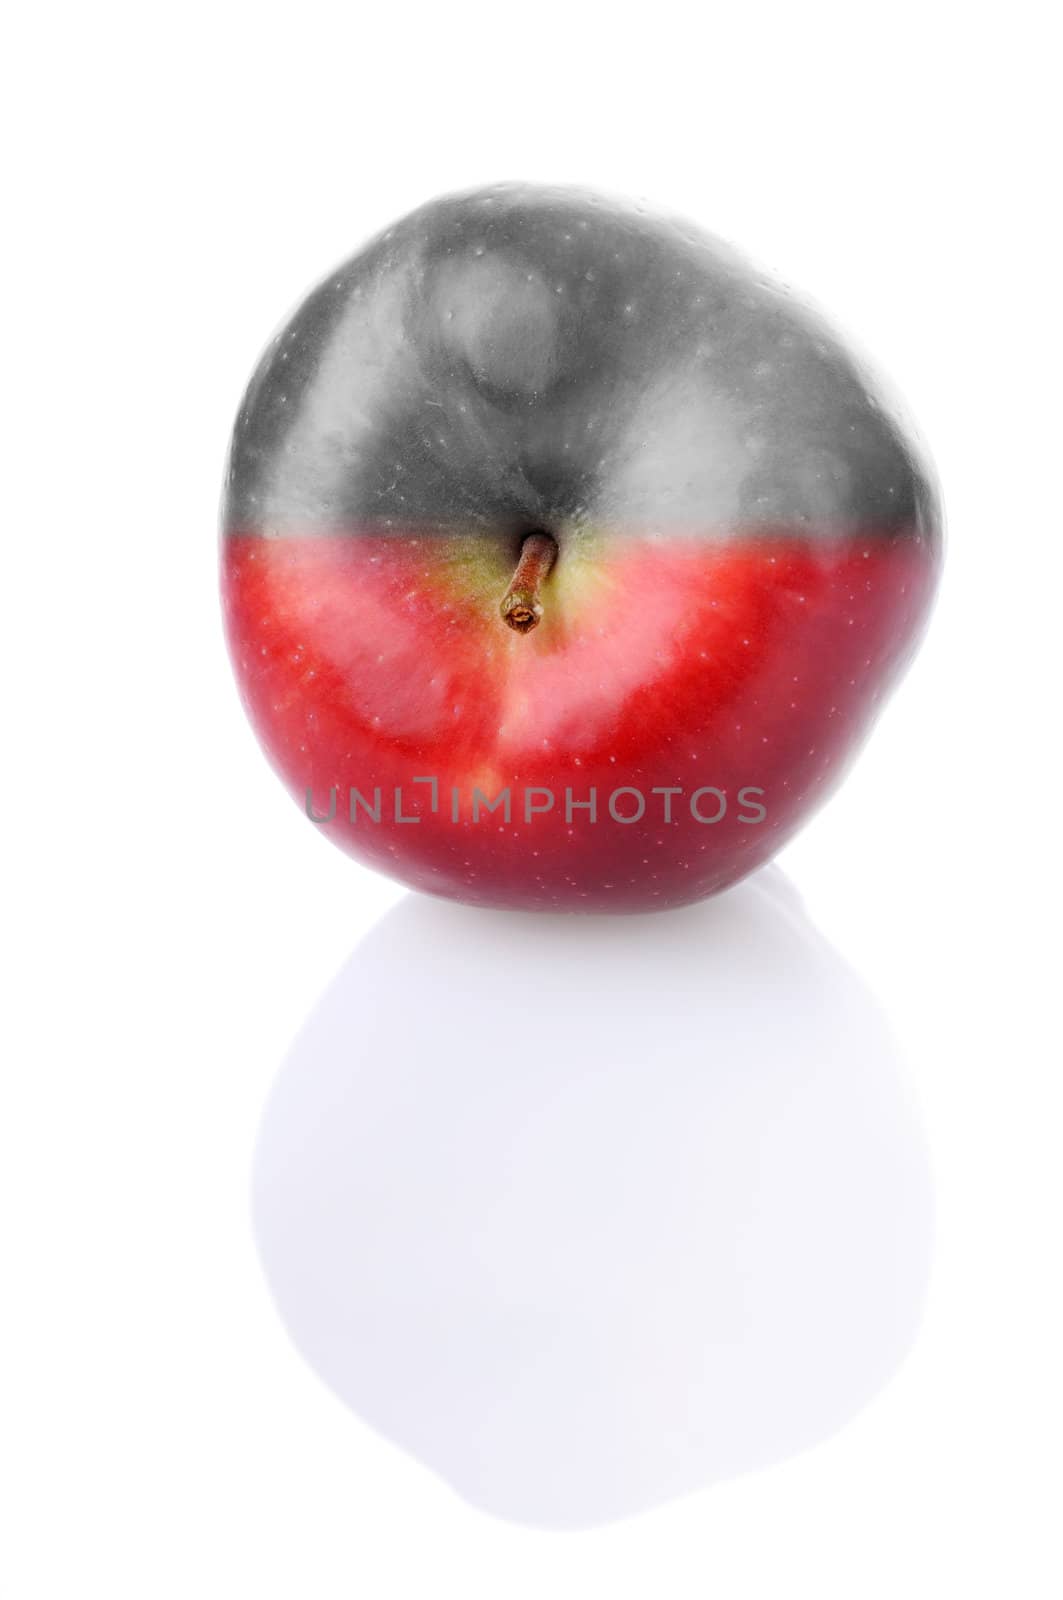 Fresh apple with stem and reflection, with red and colourless half